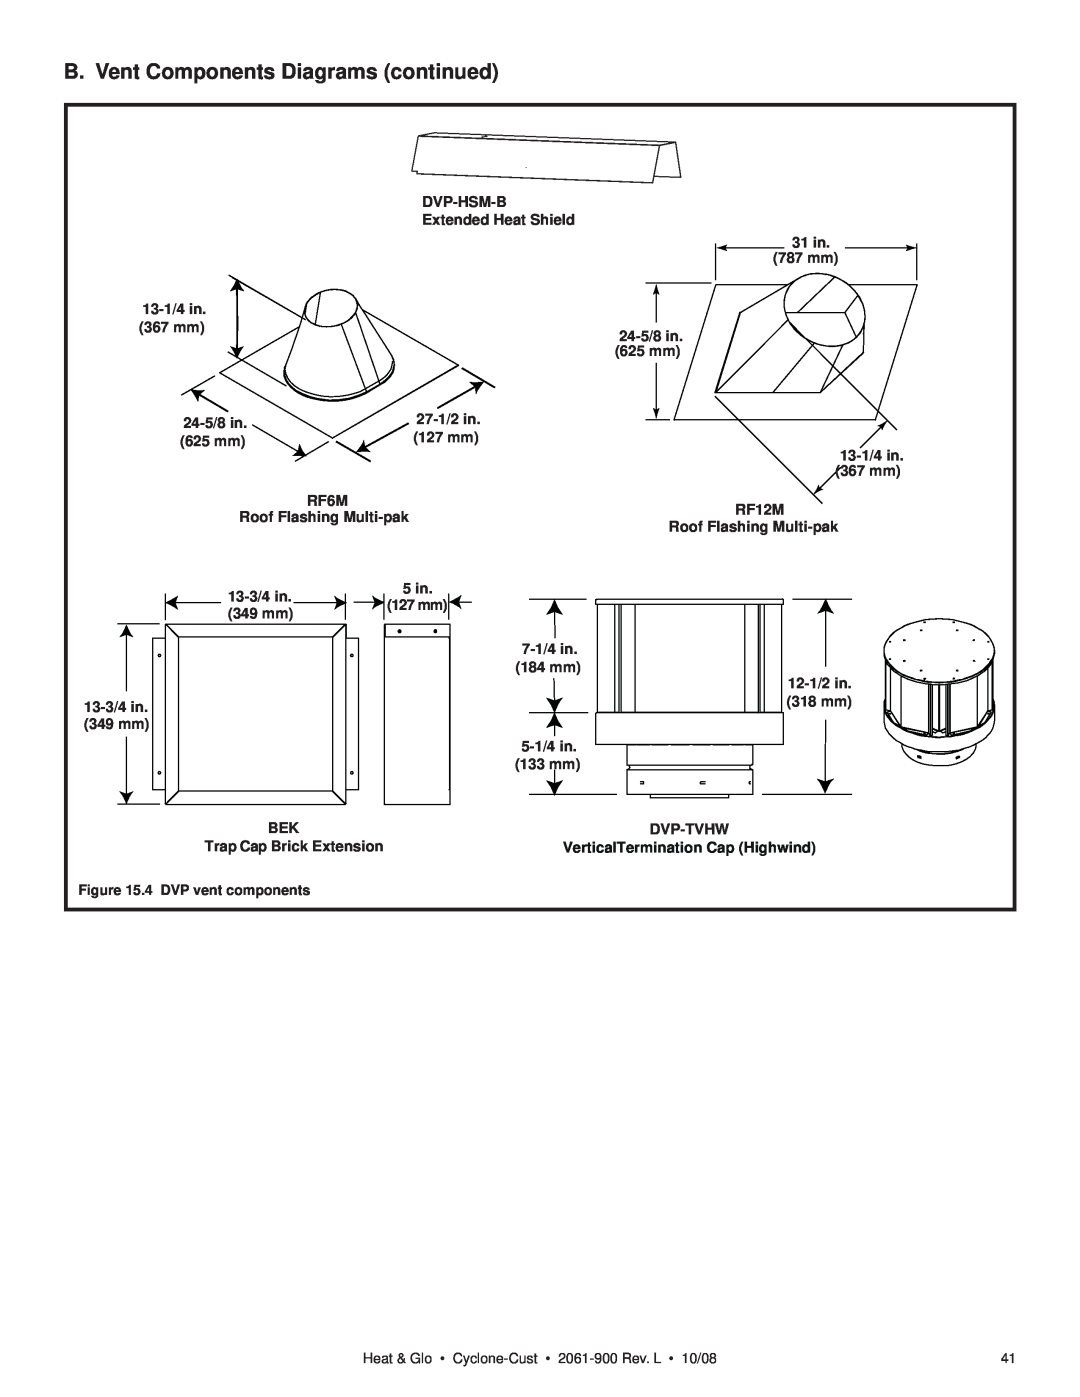 Hearth and Home Technologies Cyclone-Cust B. Vent Components Diagrams continued, Dvp-Hsm-B, Extended Heat Shield, 31 in 